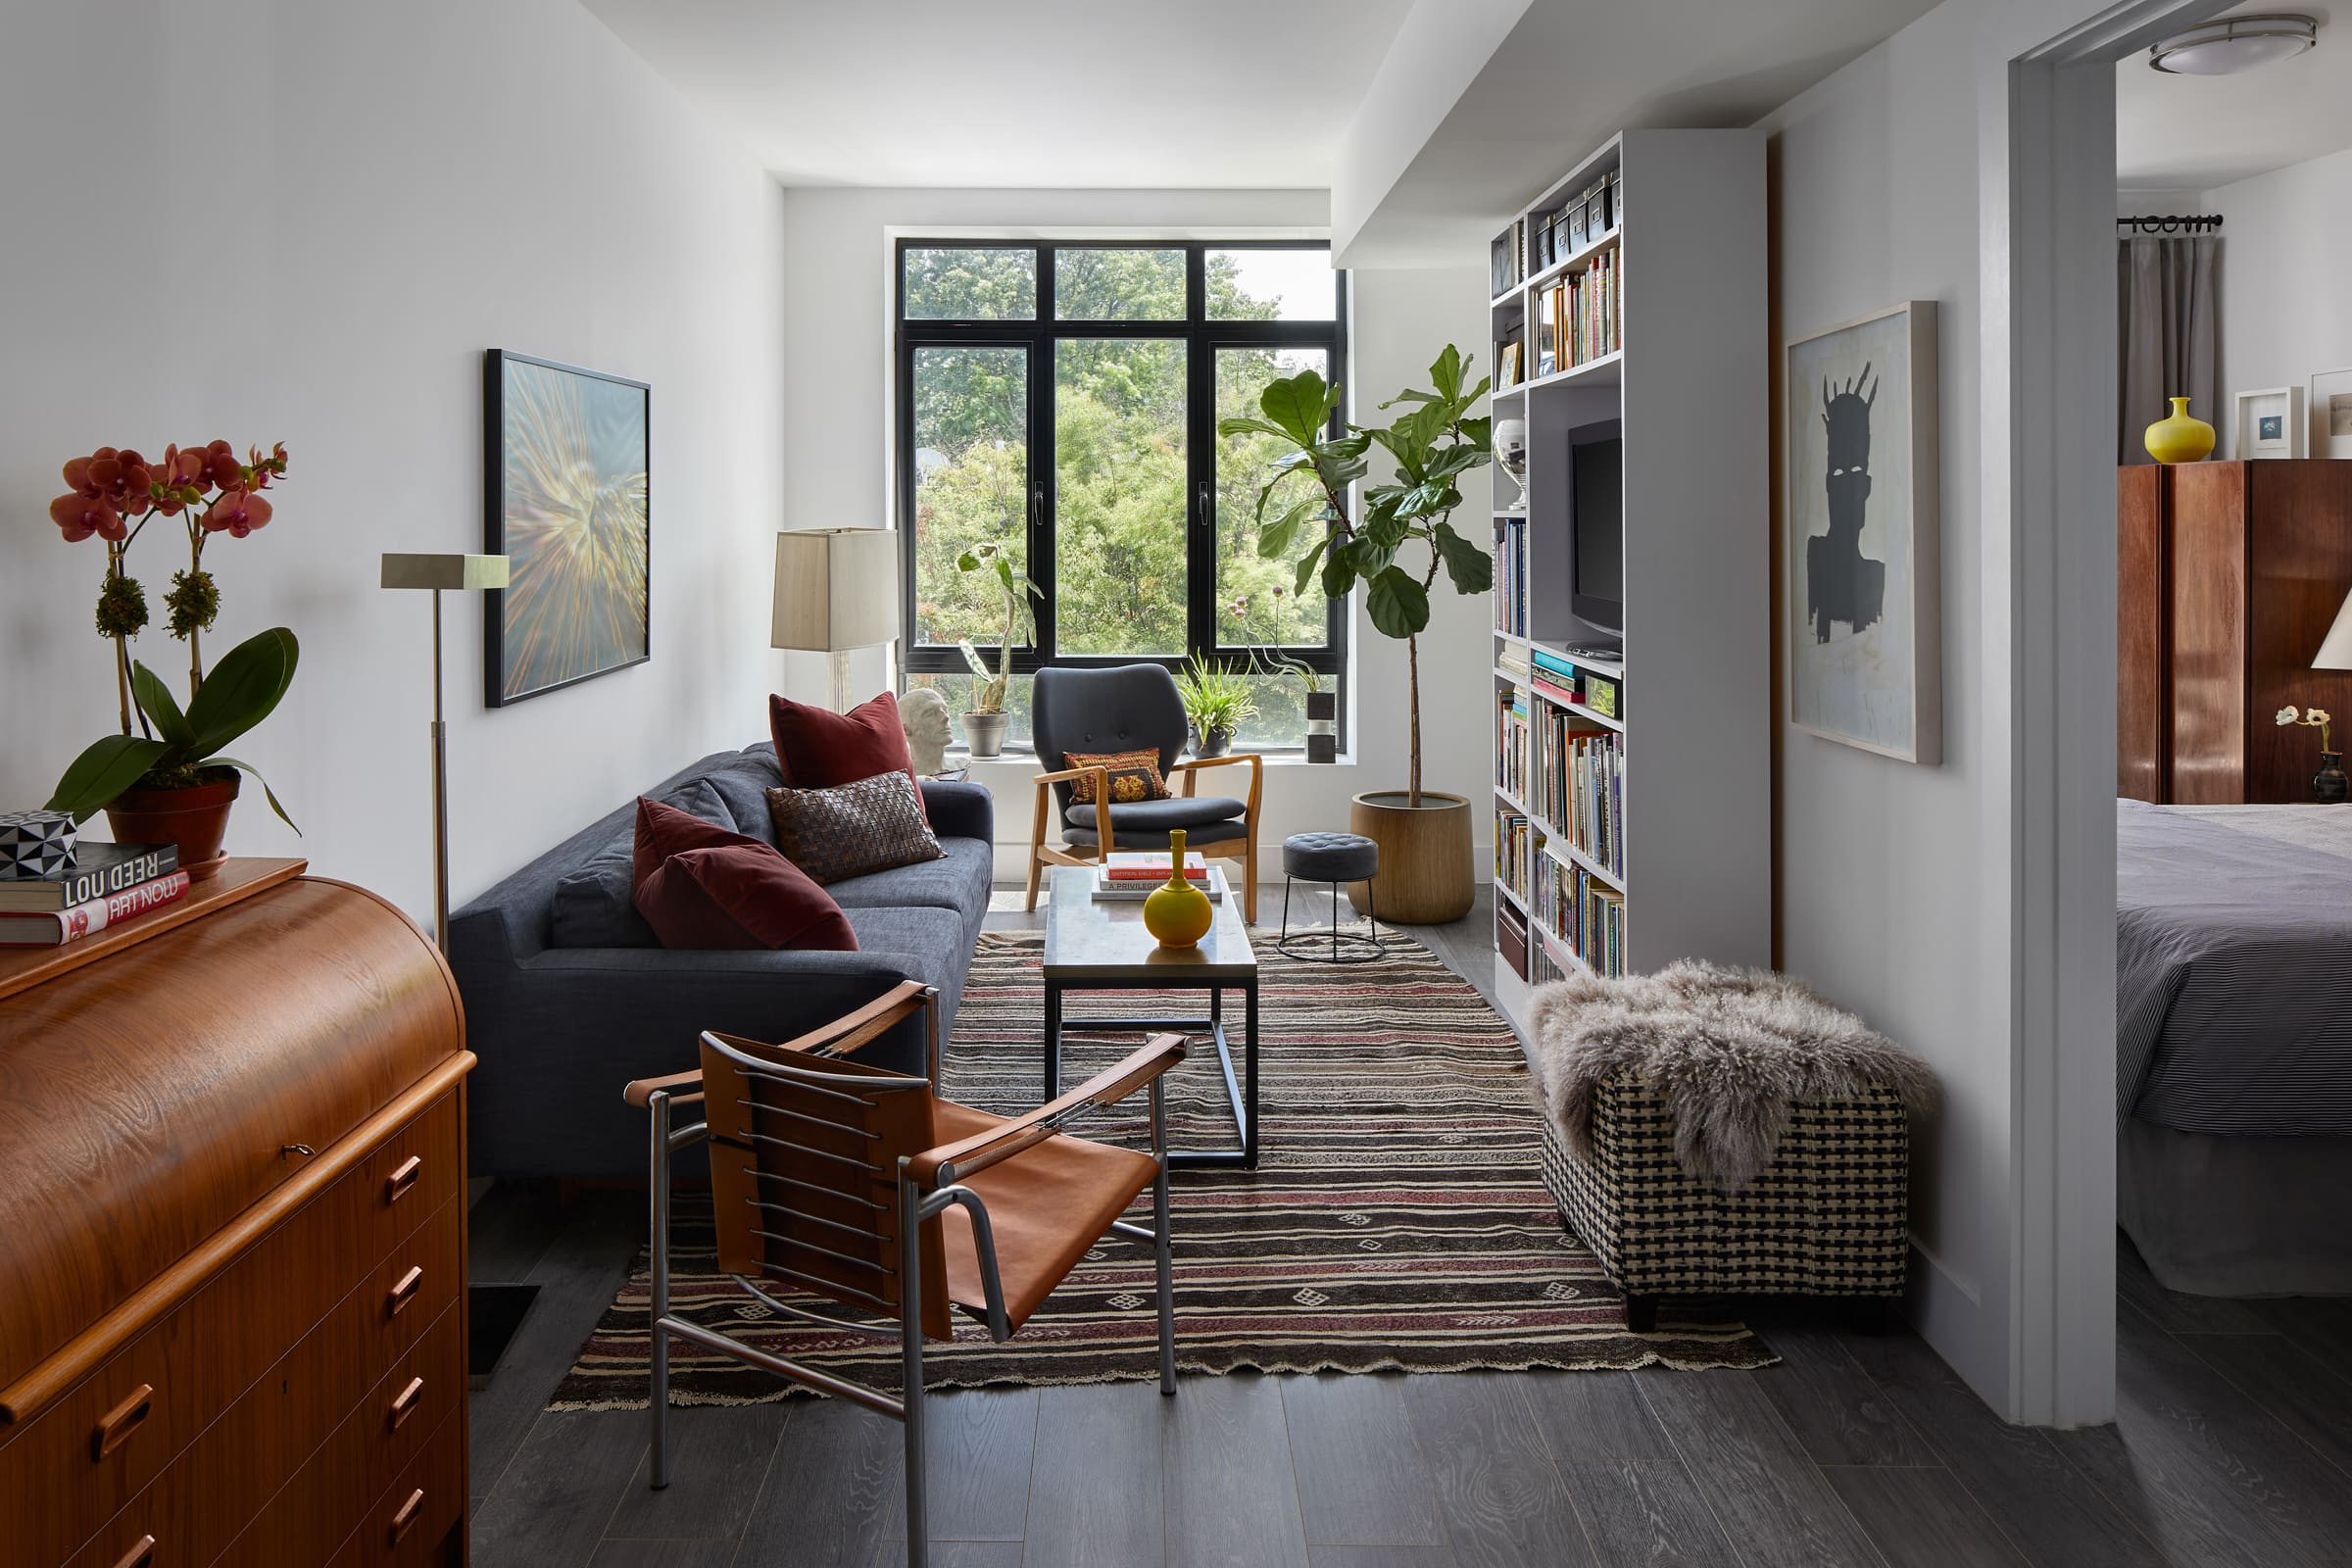 How Apartment Living Improves Your Wellbeing